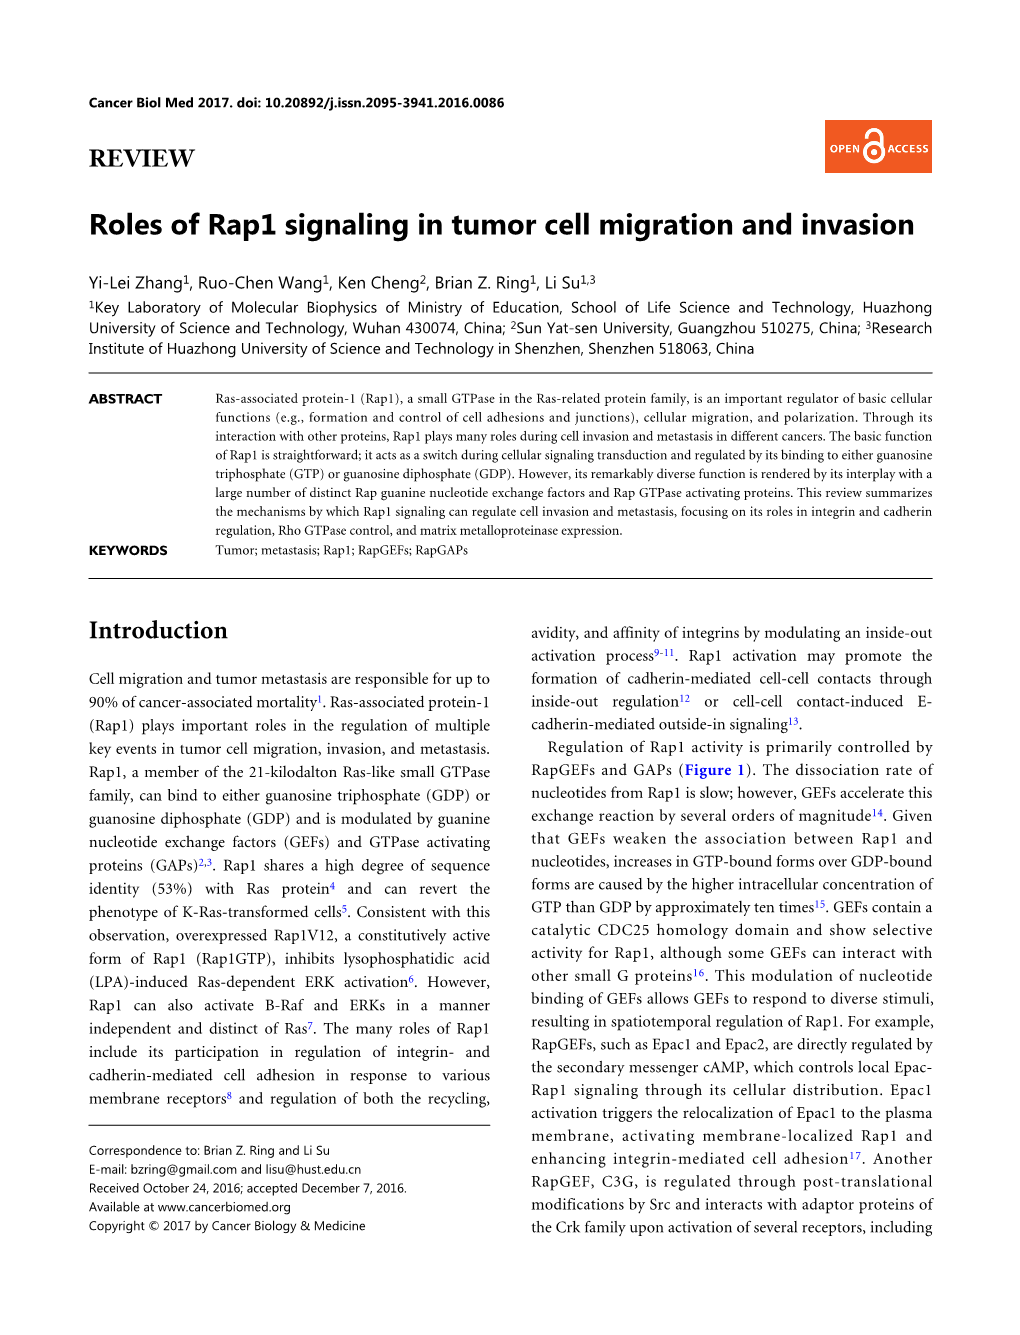 Roles of Rap1 Signaling in Tumor Cell Migration and Invasion